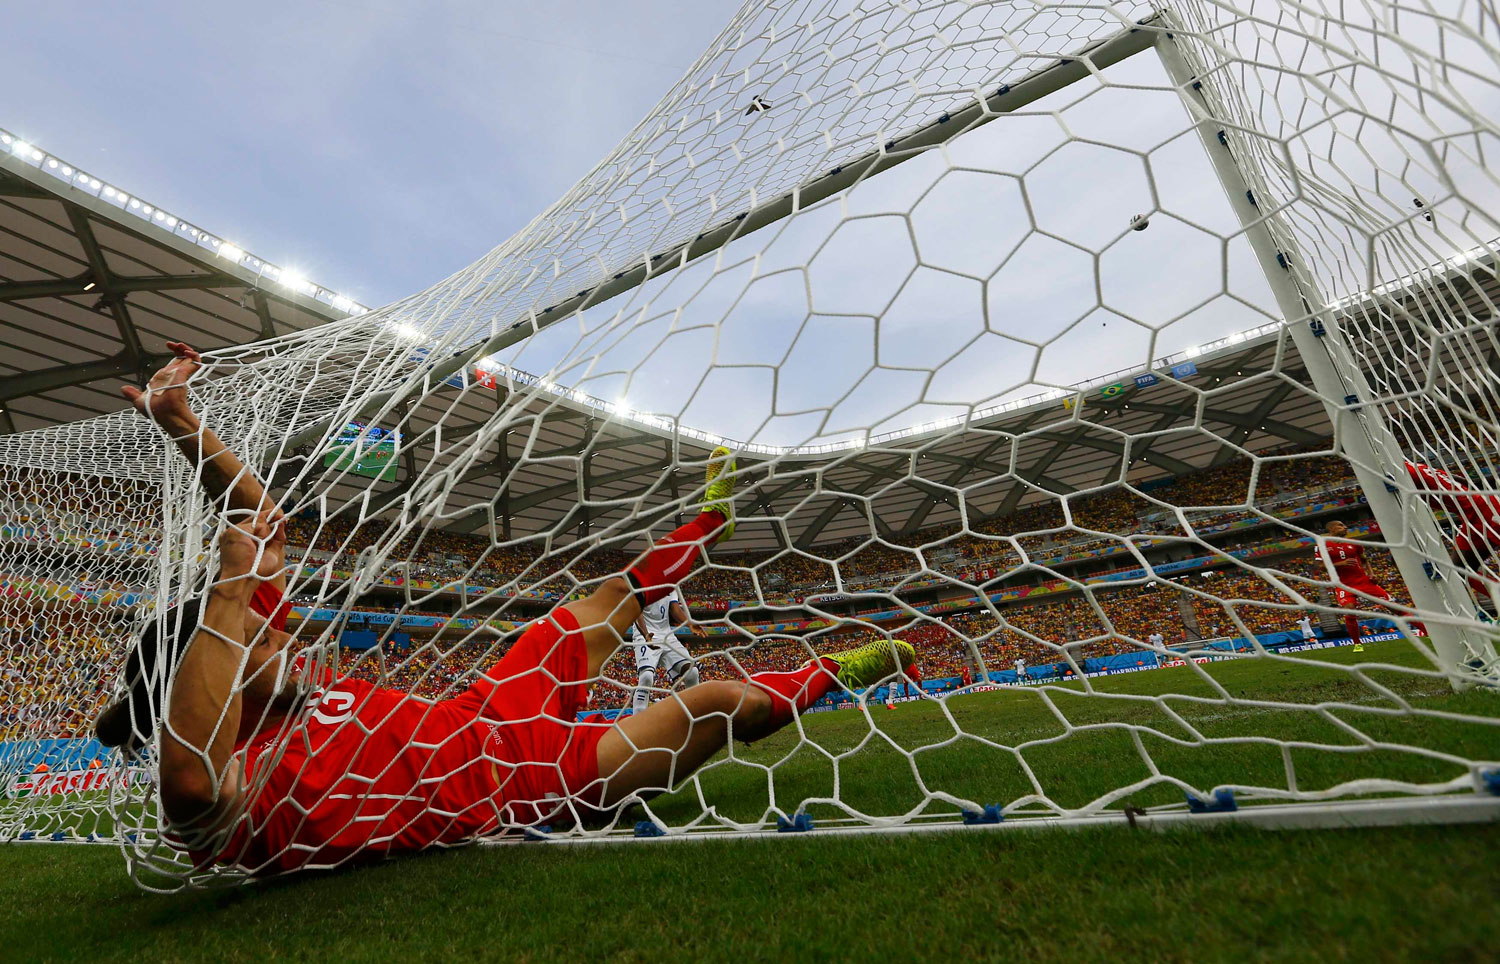 Switzerland's Ricardo Rodriguez falls into the goal net after making a save during their match against Honduras at the Amazonia arena in Manaus, Brazil on June 25, 2014.